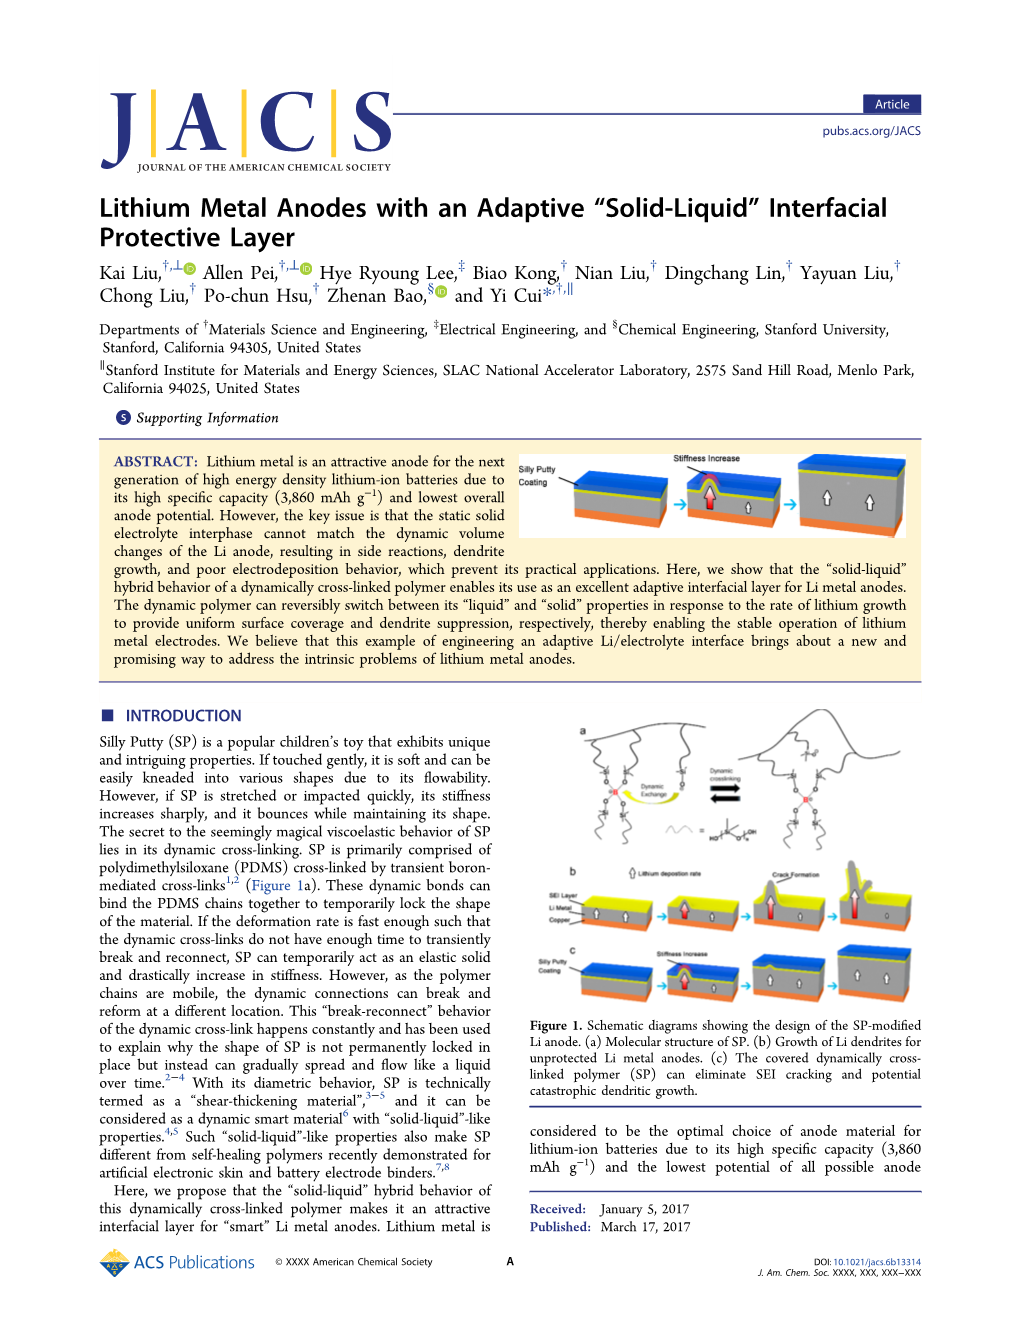 Lithium Metal Anodes with an Adaptive “Solid-Liquid” Interfacial